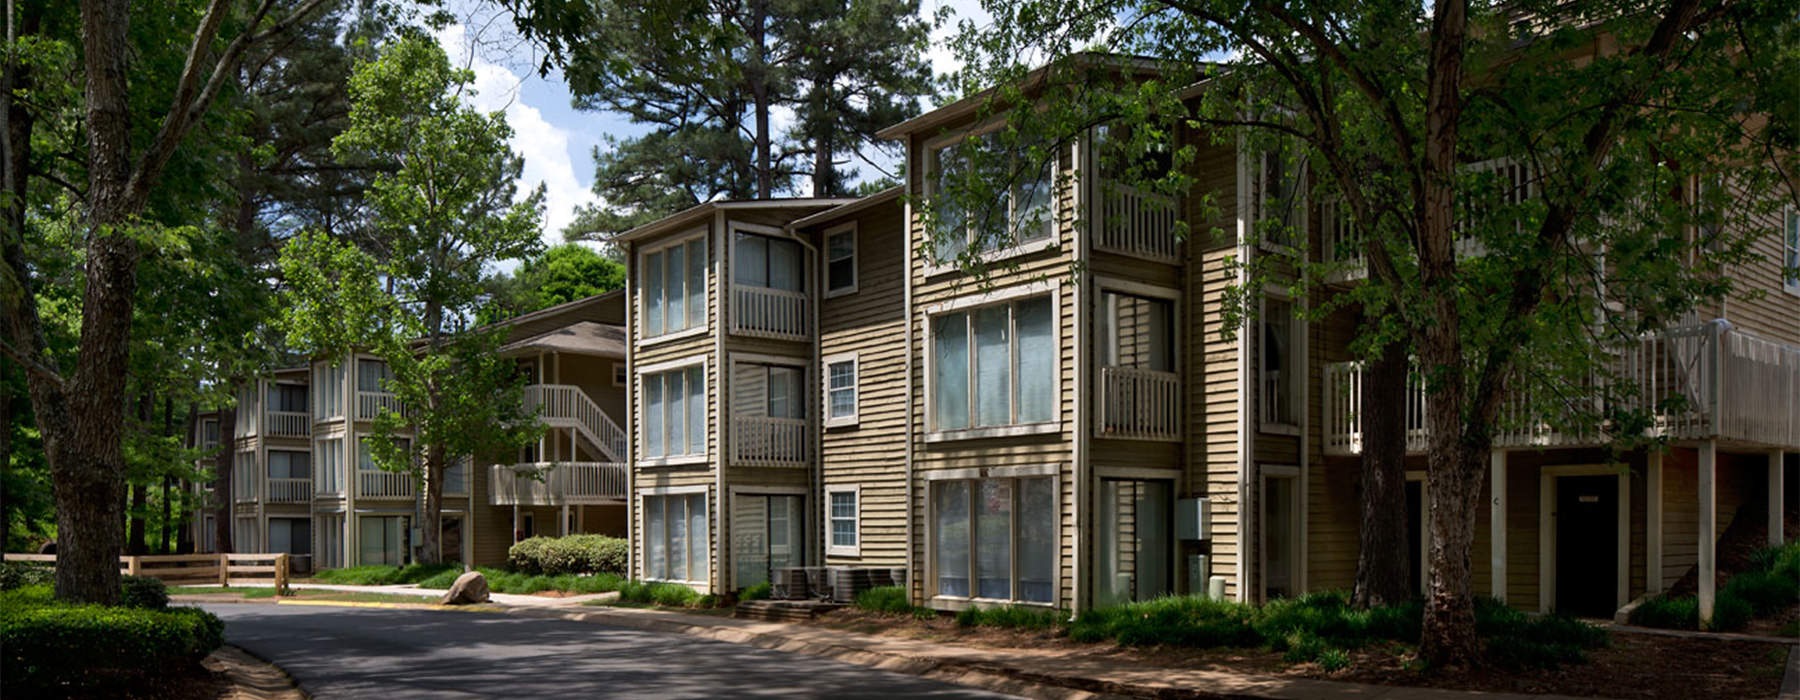 Exterior view of Roswell Creek Apartments